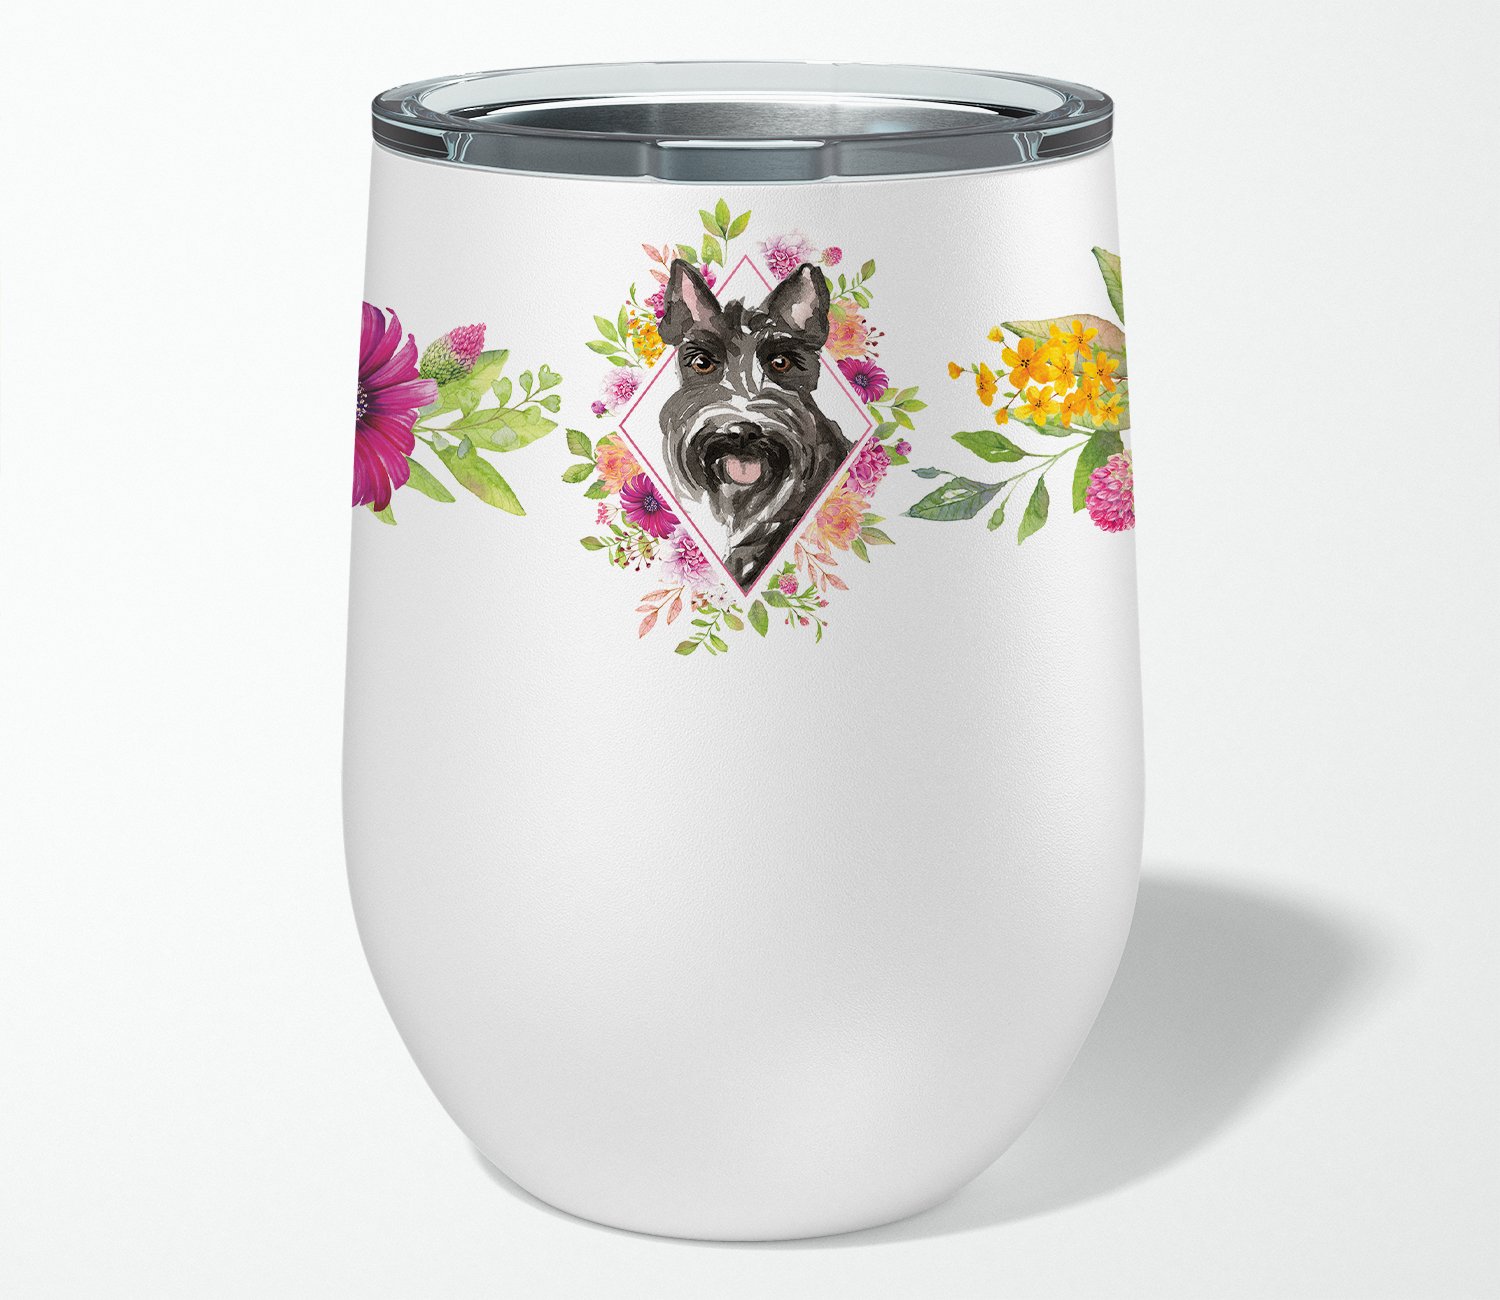 Scottish Terrier Pink Flowers Stainless Steel 12 oz Stemless Wine Glass CK4214TBL12 by Caroline's Treasures